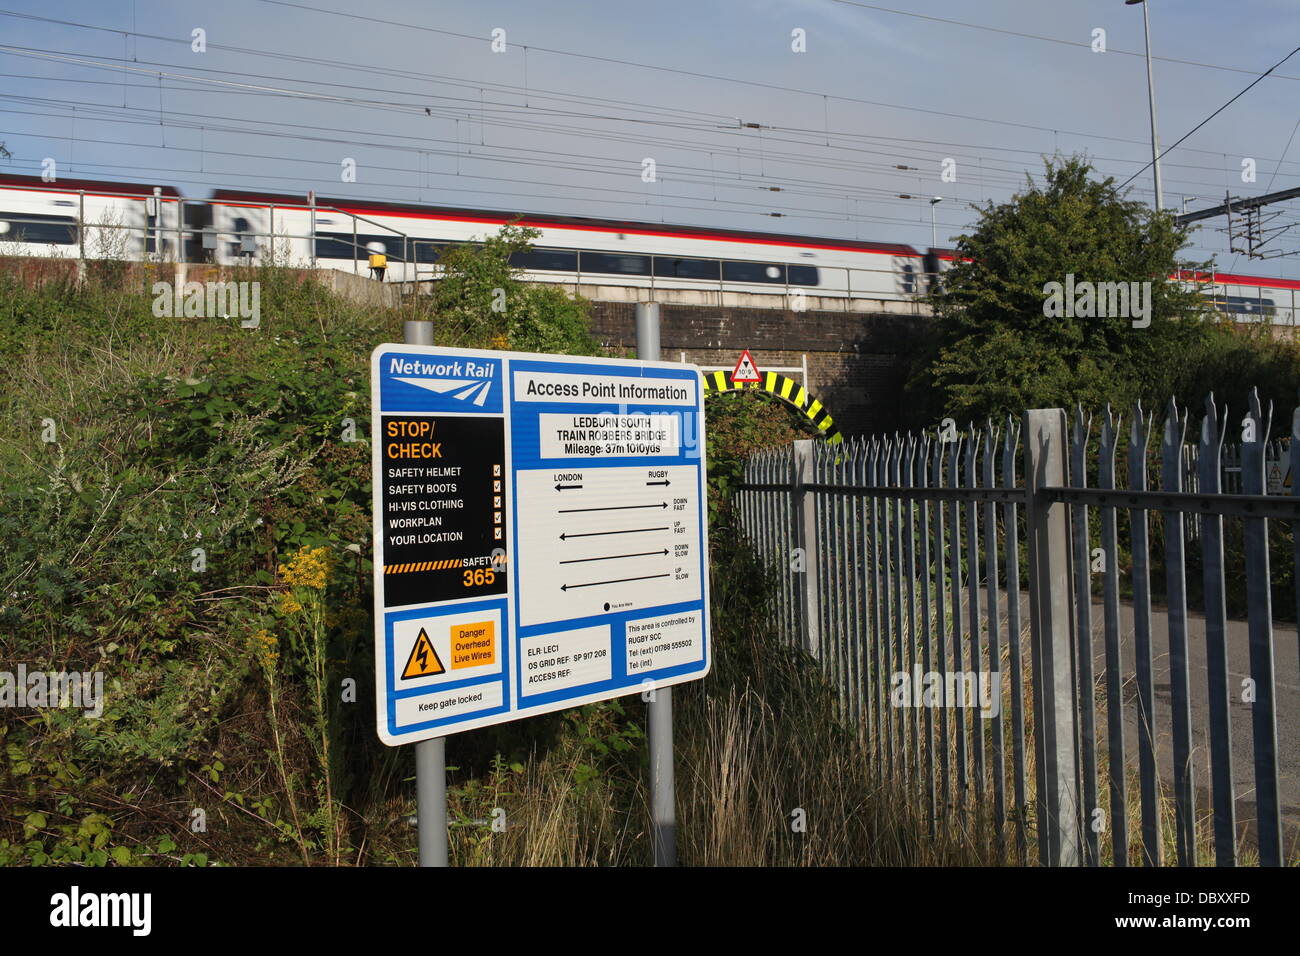 Ledburn, UK. 6th August 2013, Train Robber's Bridge, Ledburn, Bucks, UK. The site of the Great Train Robbery on 8th August 1963 where a Royal Mail train was emptied of £2.6 million by 15 members of Bruce Reynolds' gang Credit:  Neville Styles/Alamy Live News Stock Photo